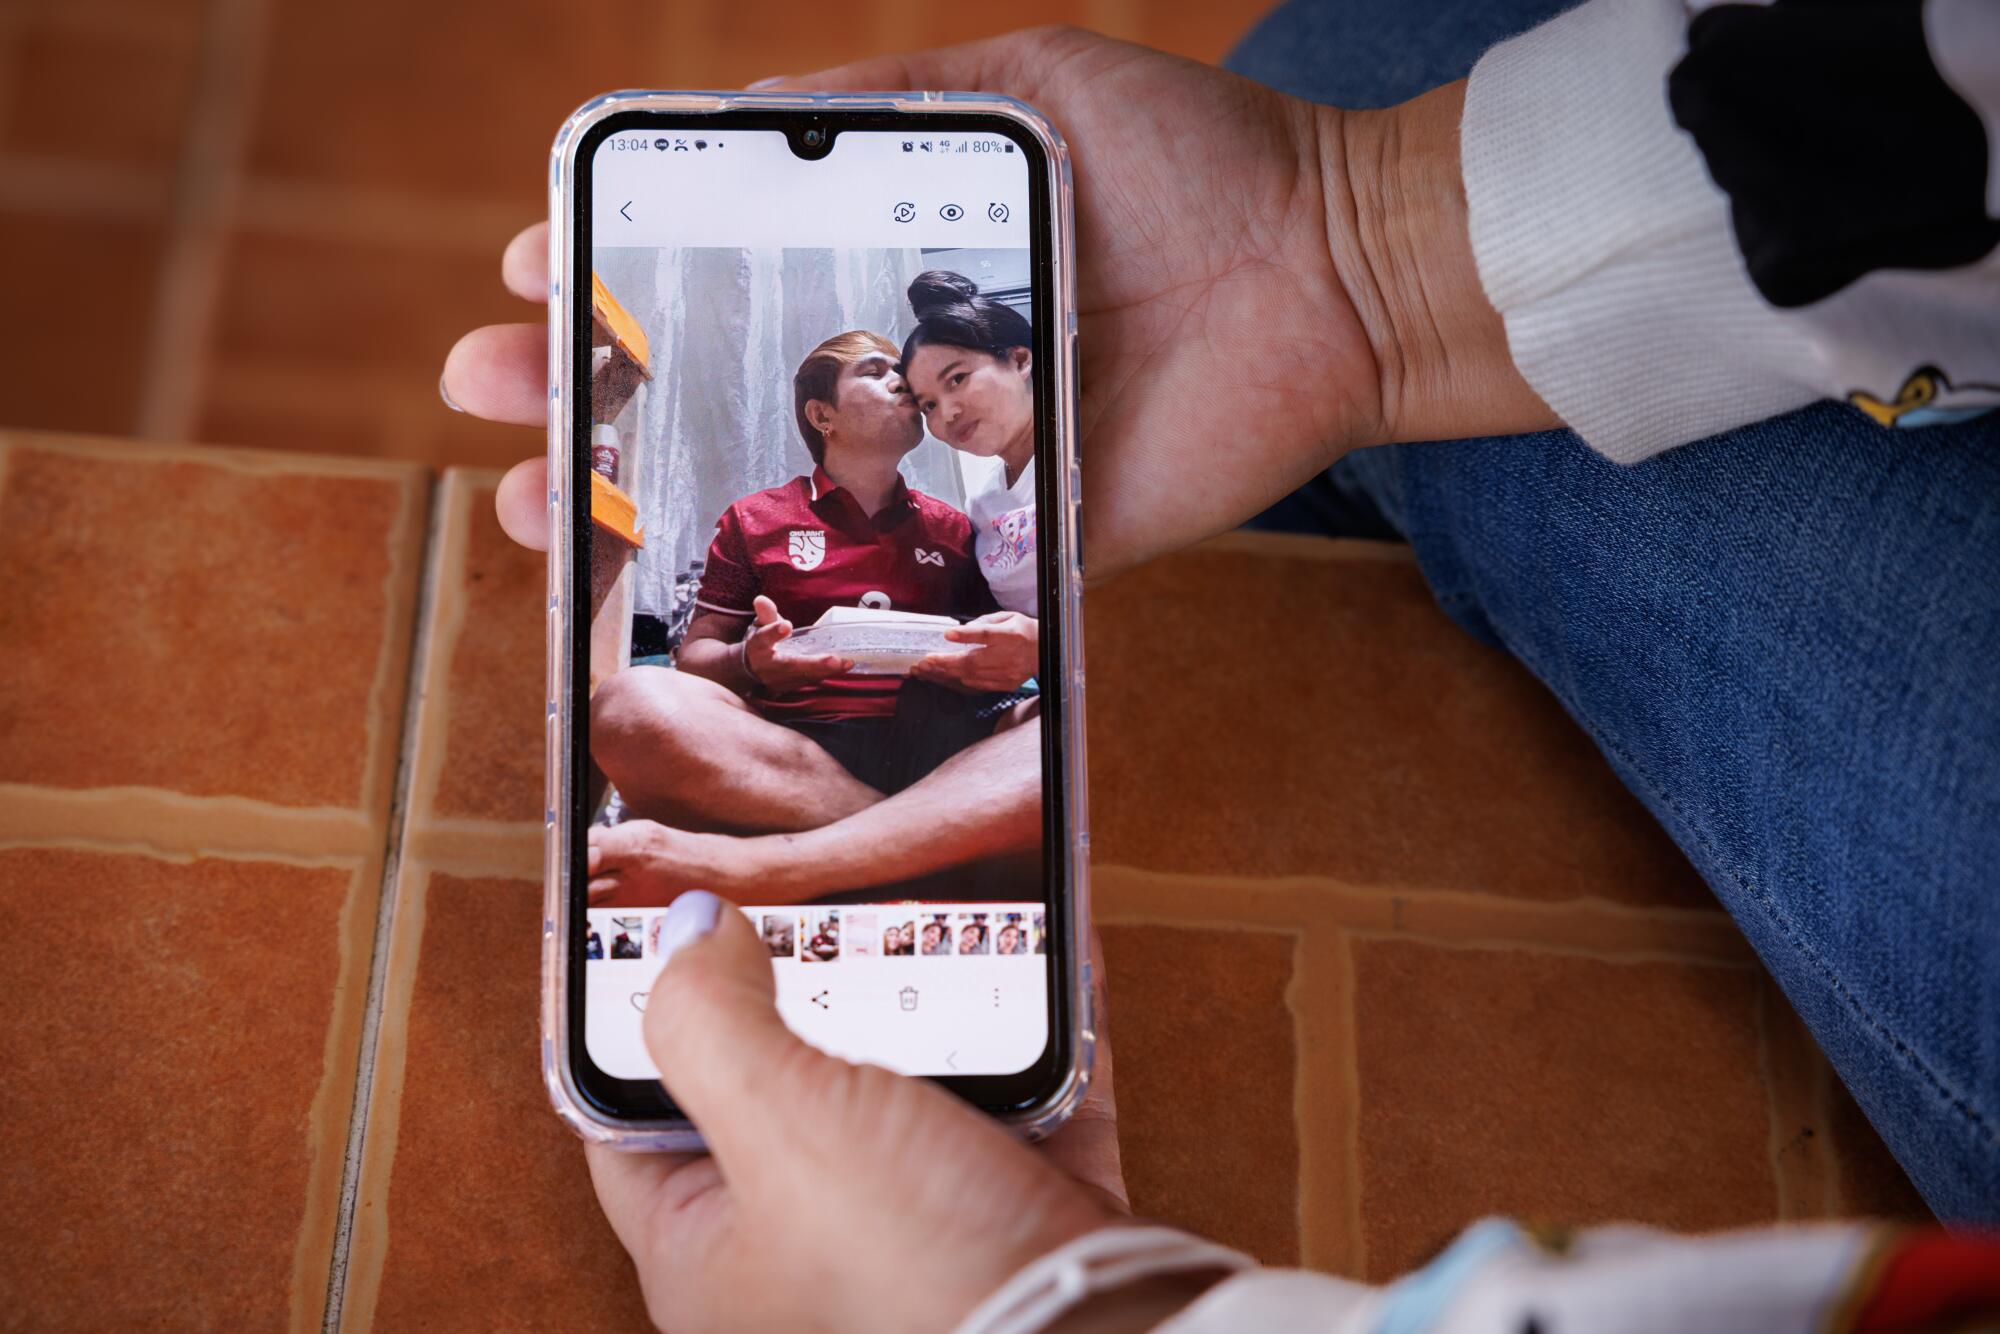 Two hands hold a phone open to a photo of a man and woman.